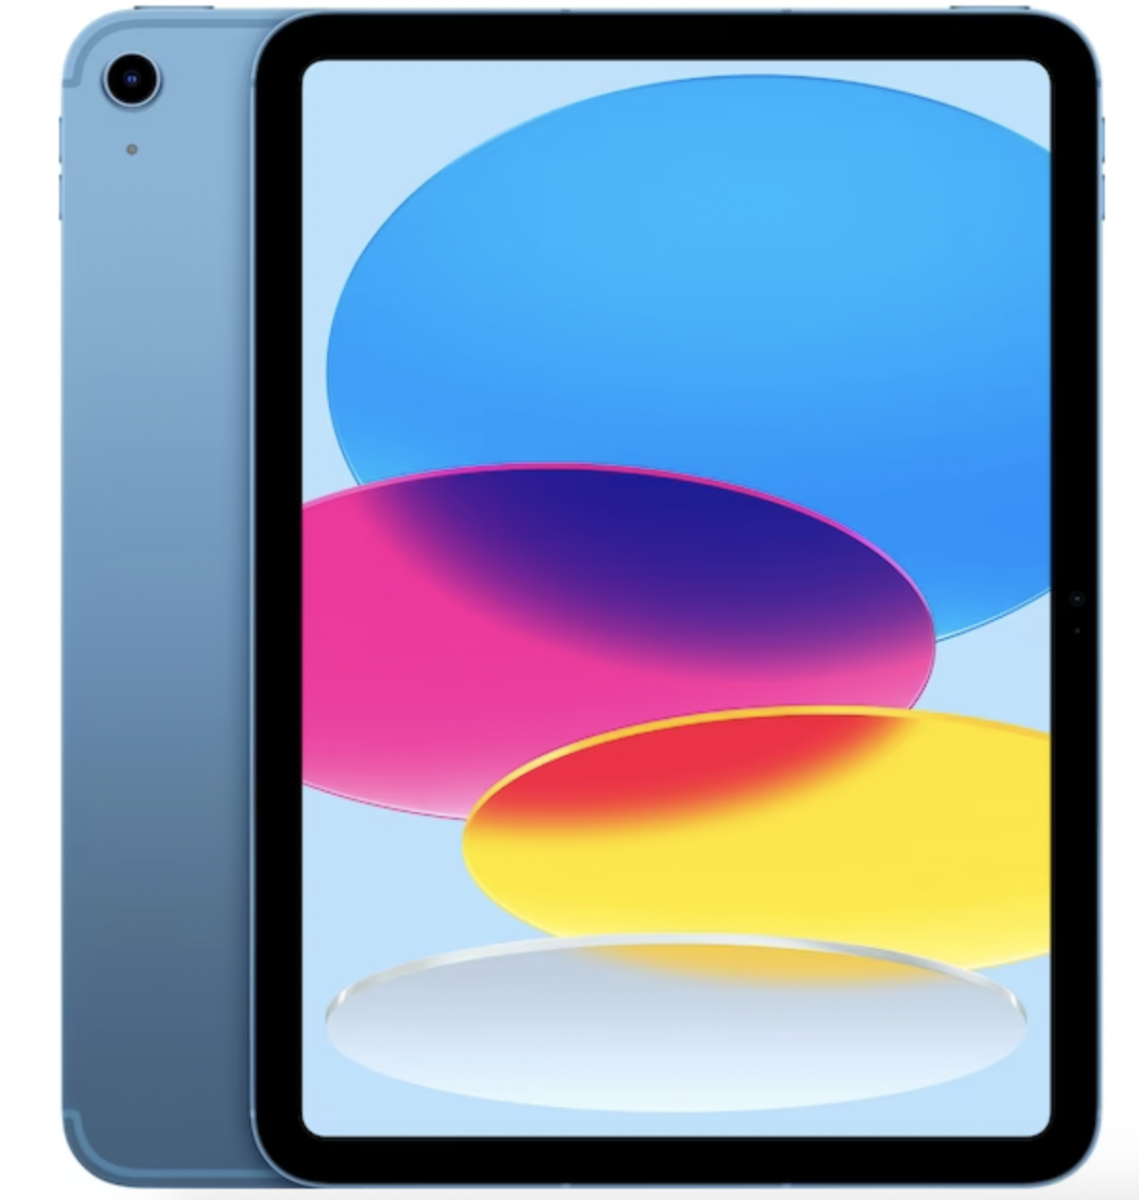 Shop iPads at Best Buy this Black Friday for great prices.